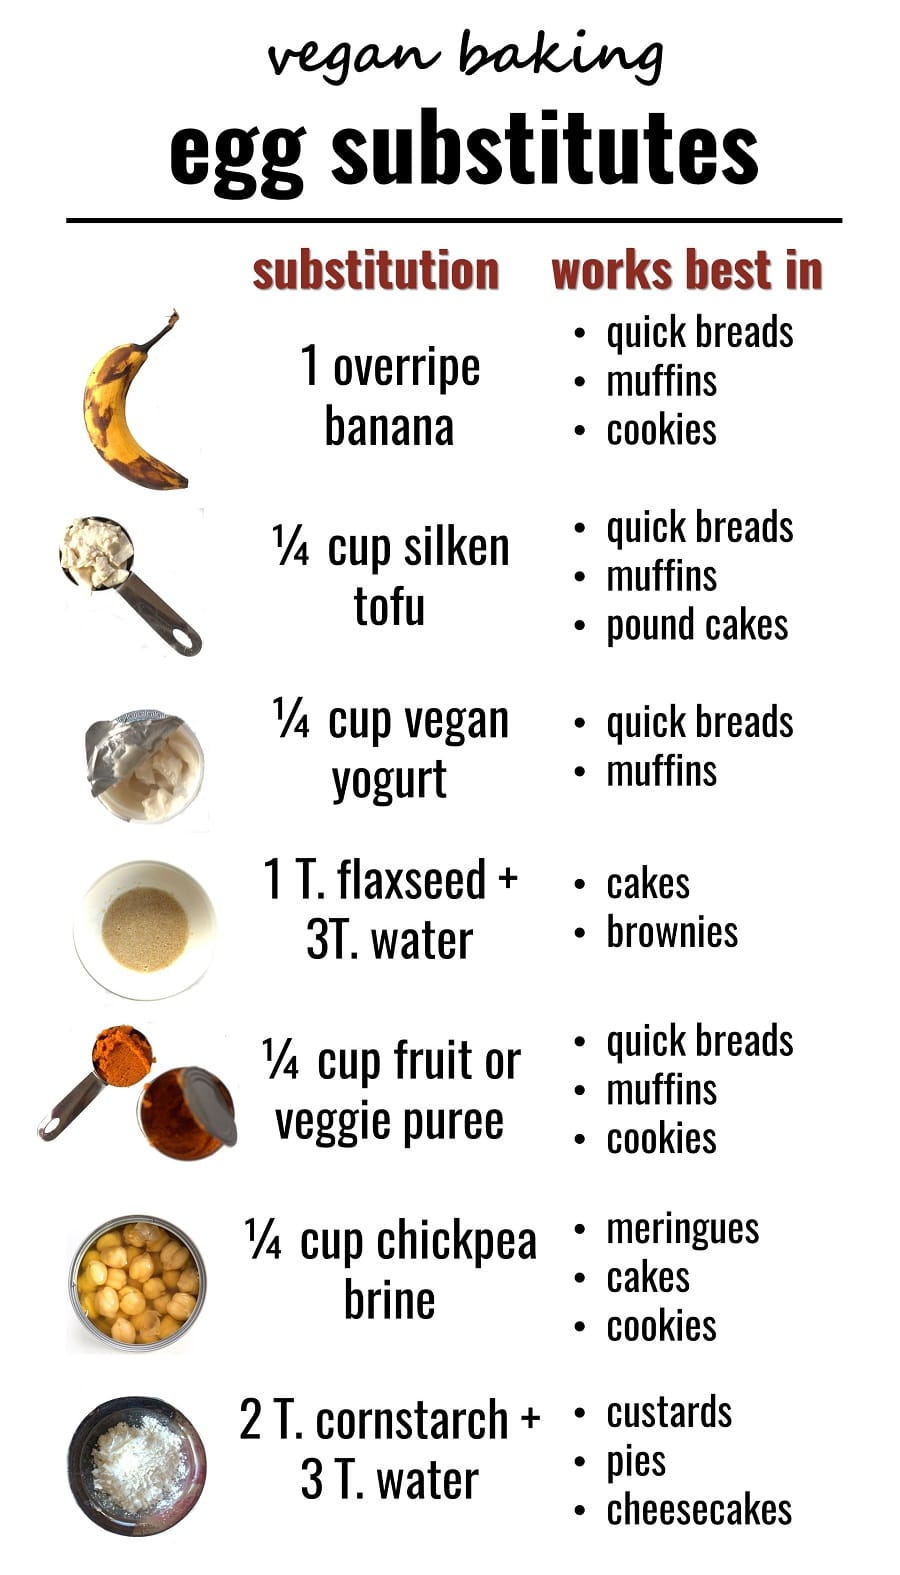 Infographic Listing Common Vegan Egg Substitutes and Best Uses